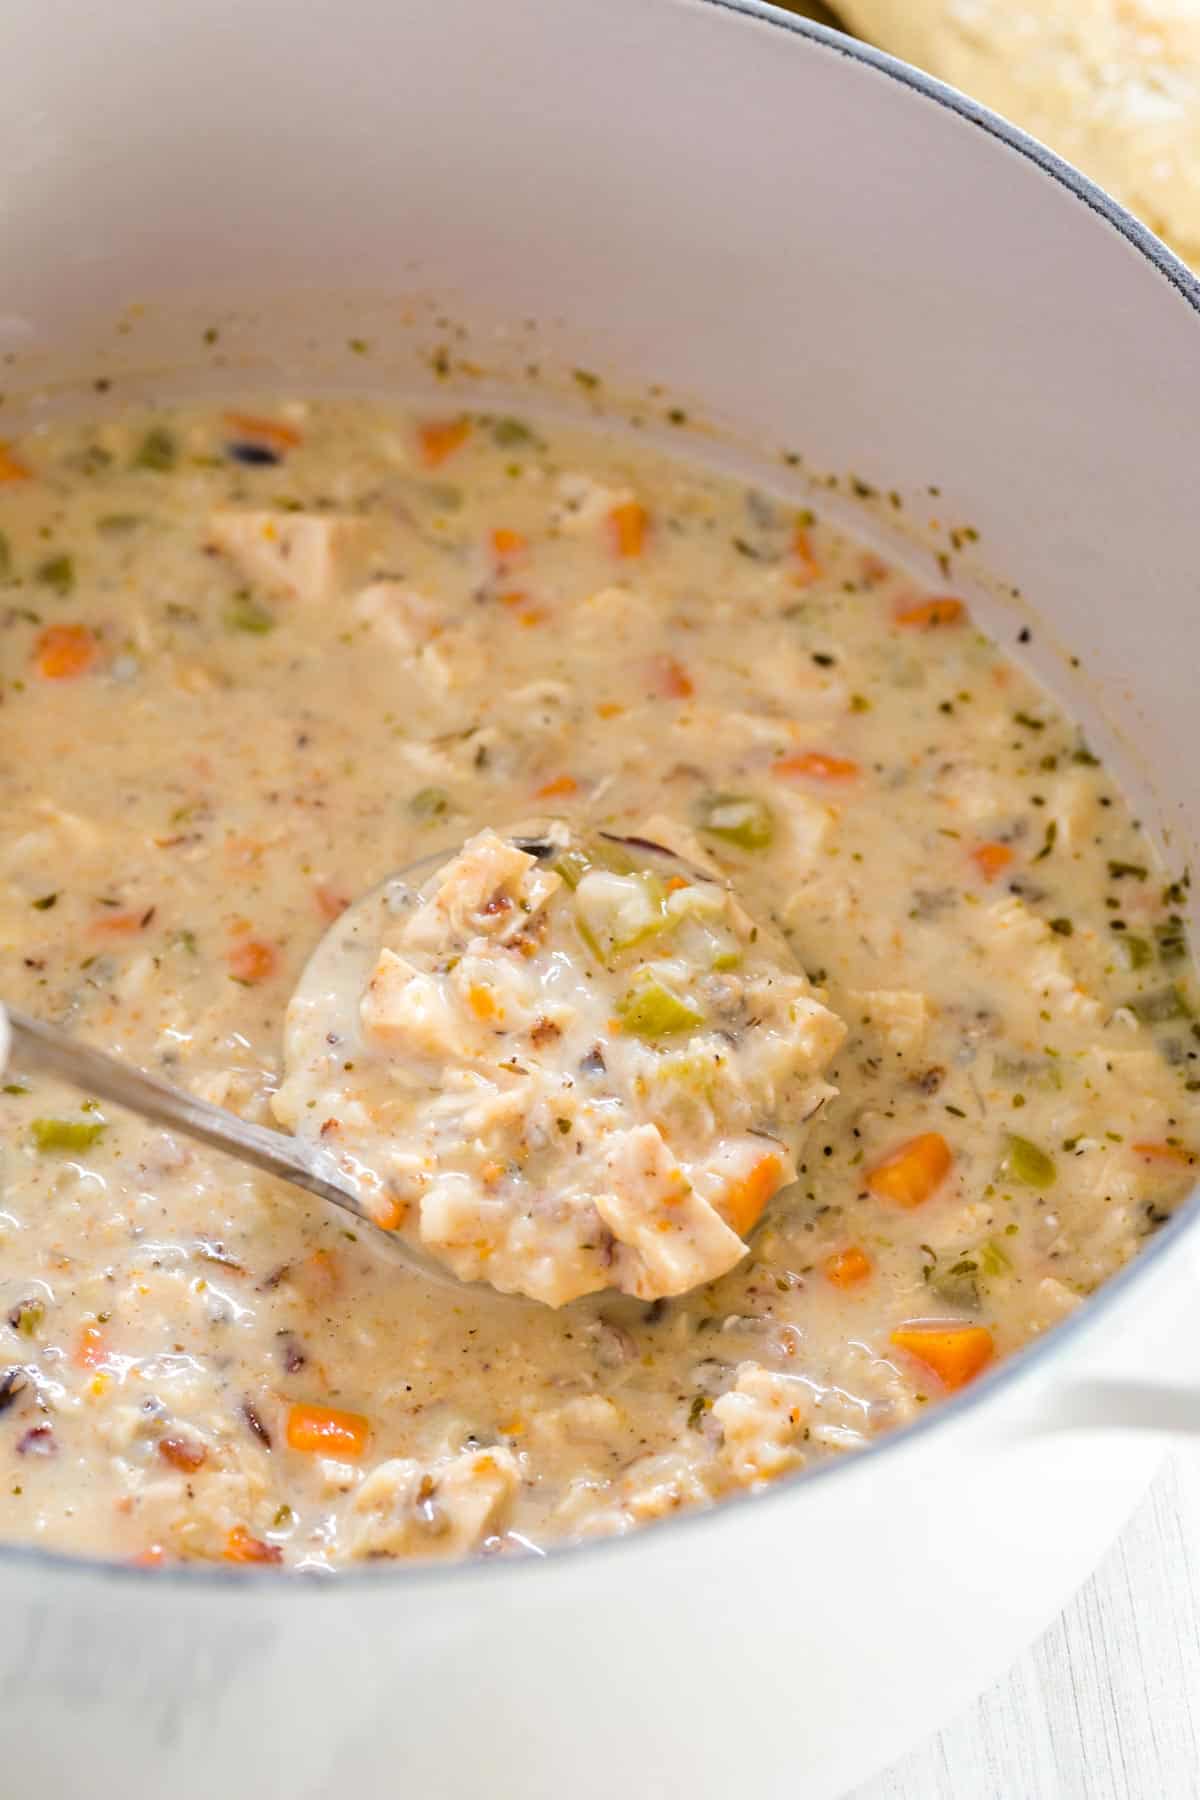 Creamy chicken wild rice soup is ladled from a pot.